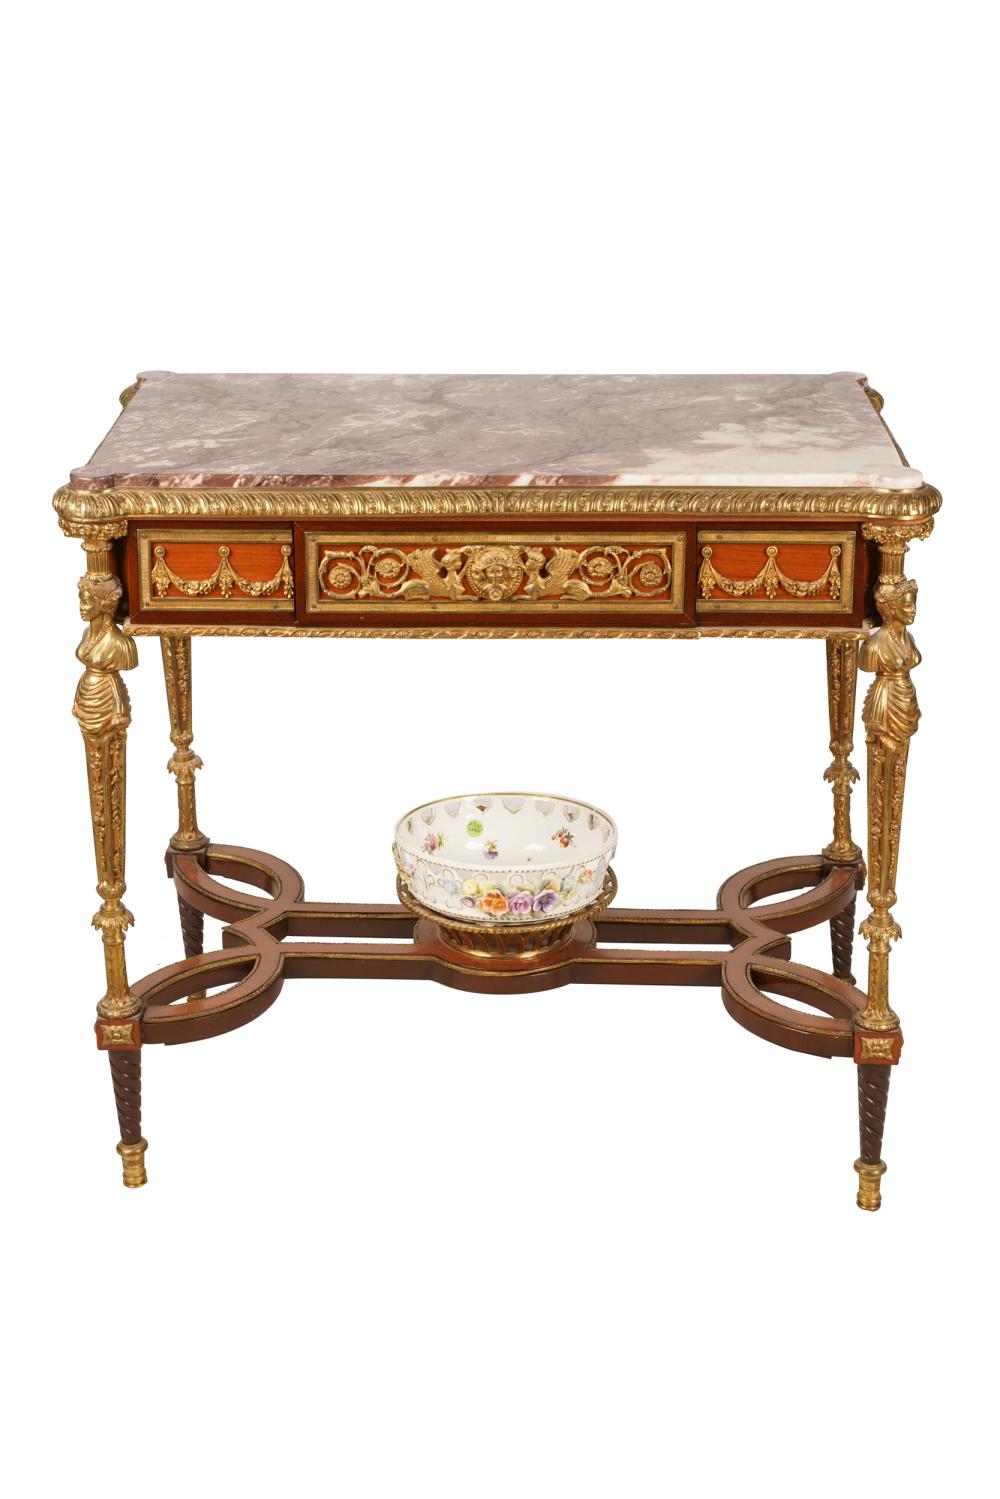 FRENCH MARBLE-TOP SIDE TABLEafter